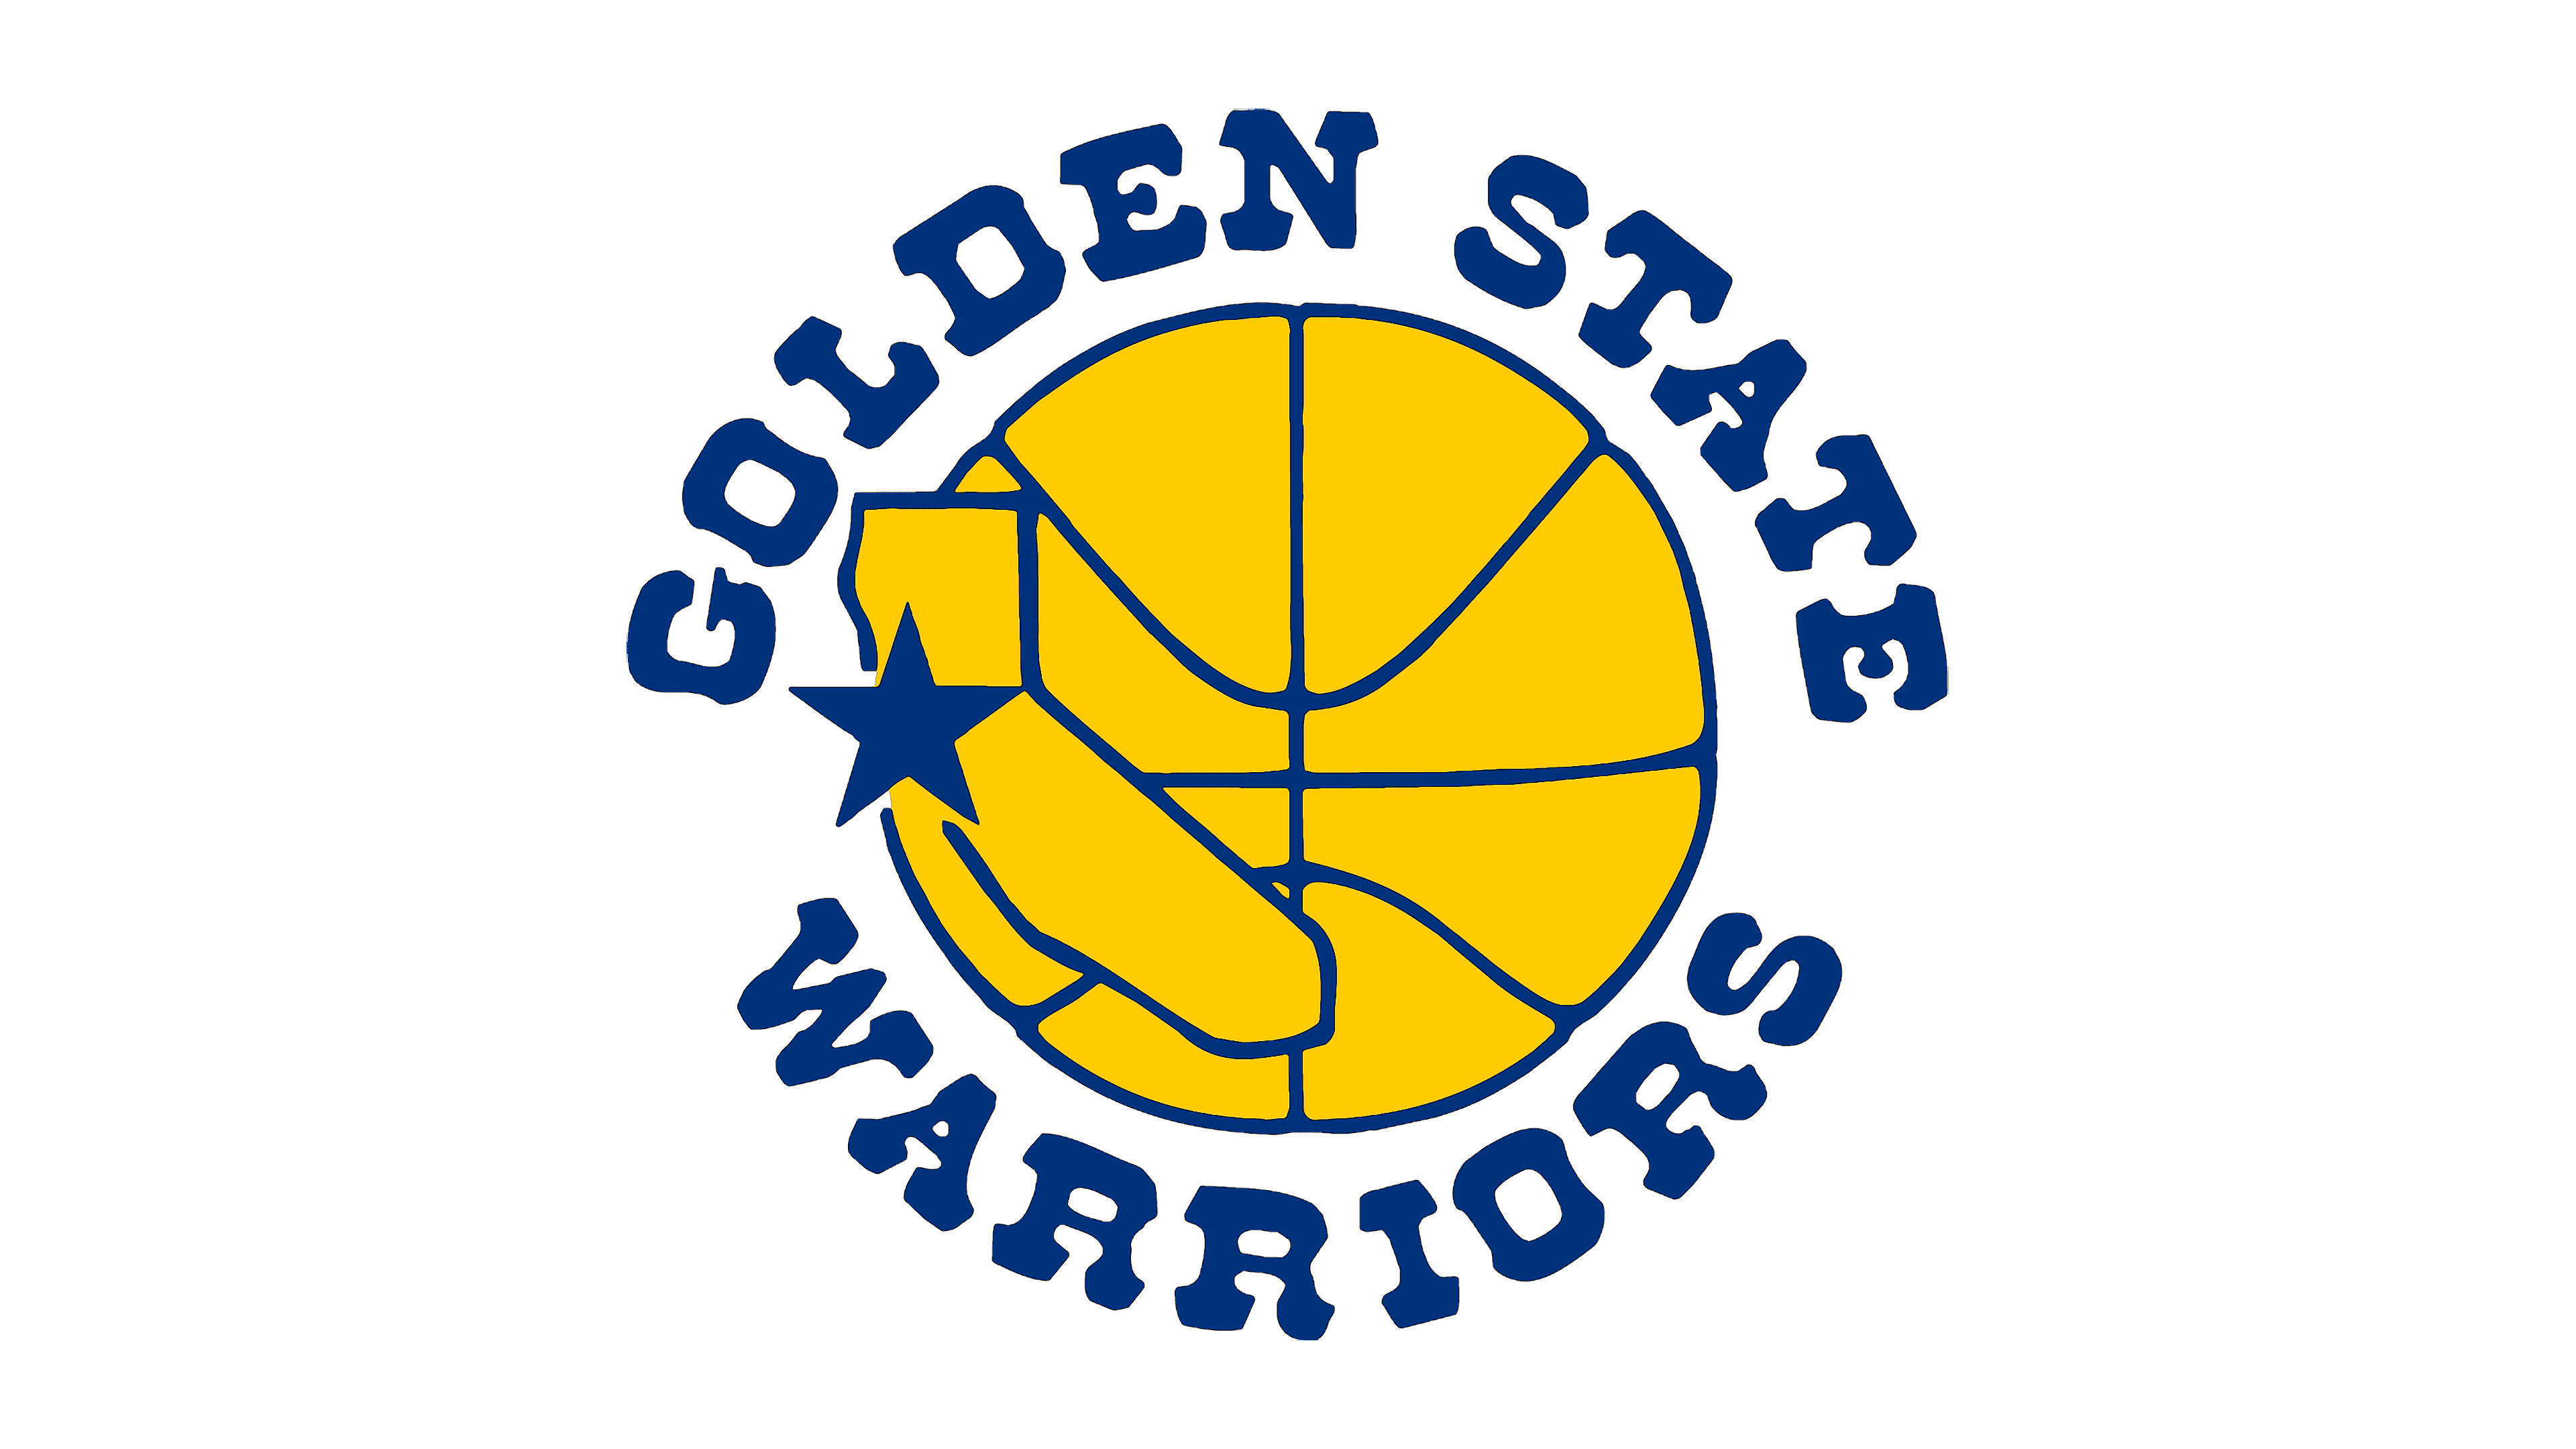 The stripes The colors The history - Golden State Warriors